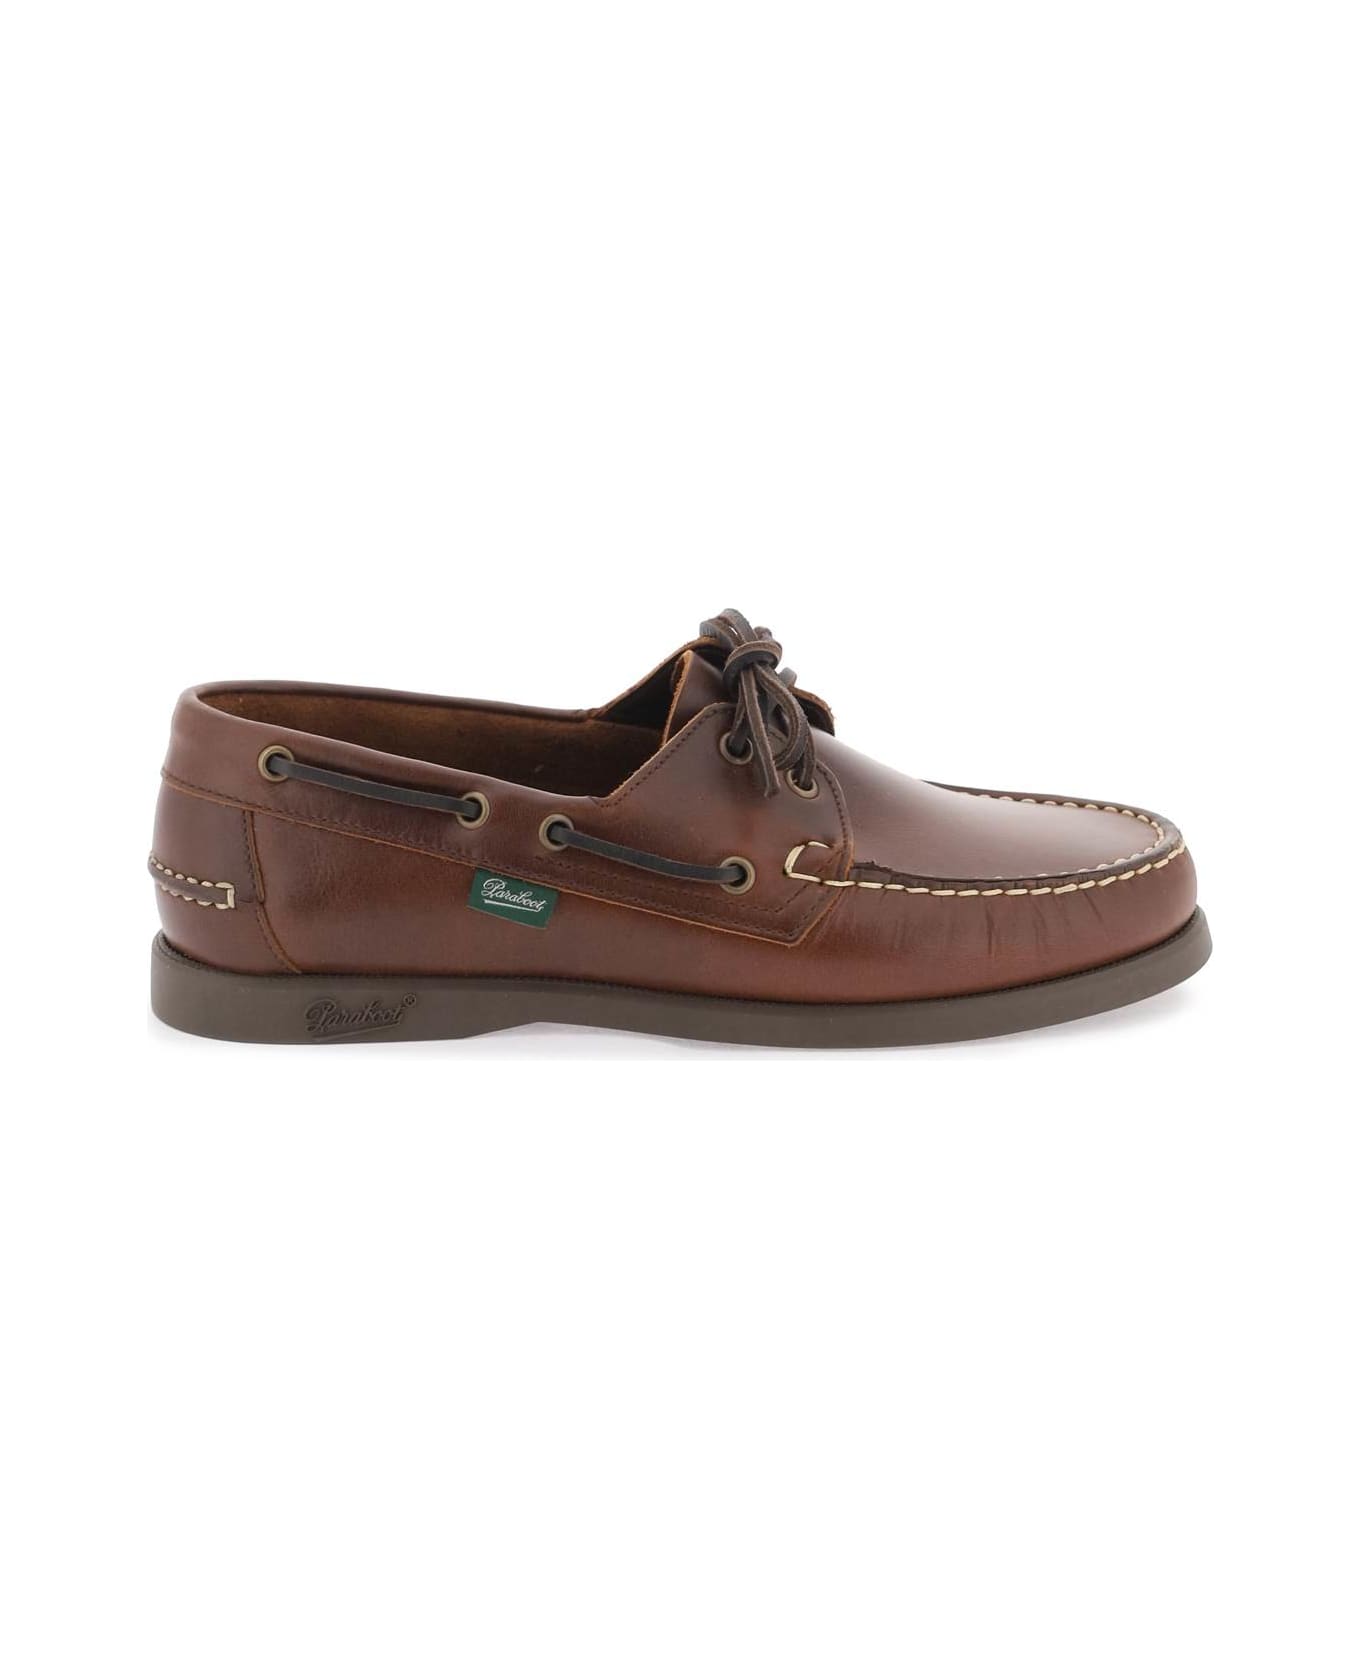 Paraboot Barth Loafers - MARRON LIS AMERICA (Brown)